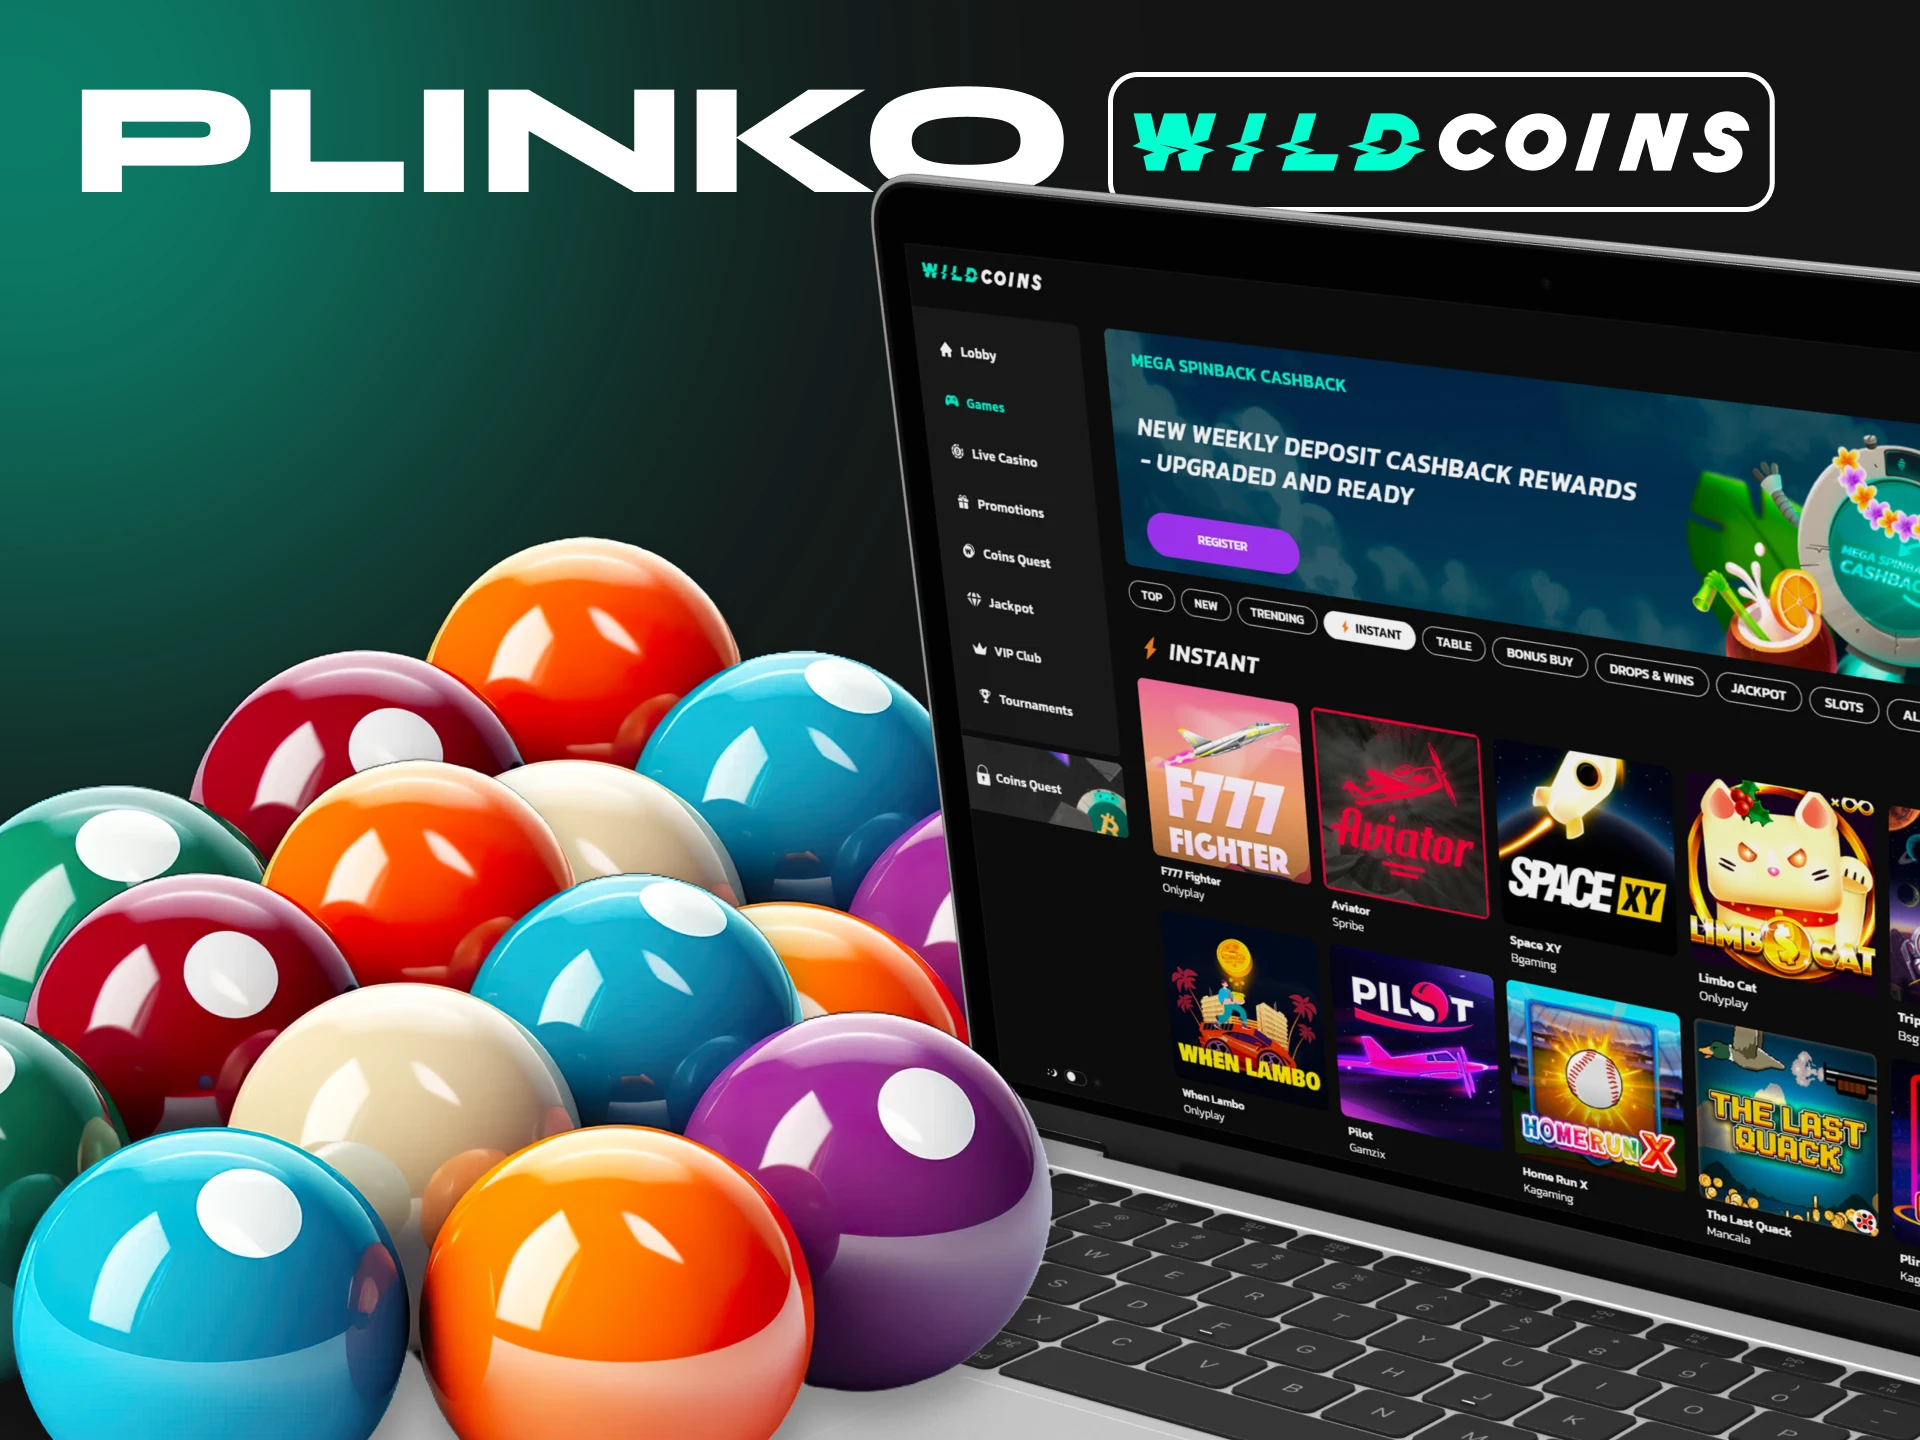 Play the arcade game Plinko at Wildcoins Casino with cryptocurrency.